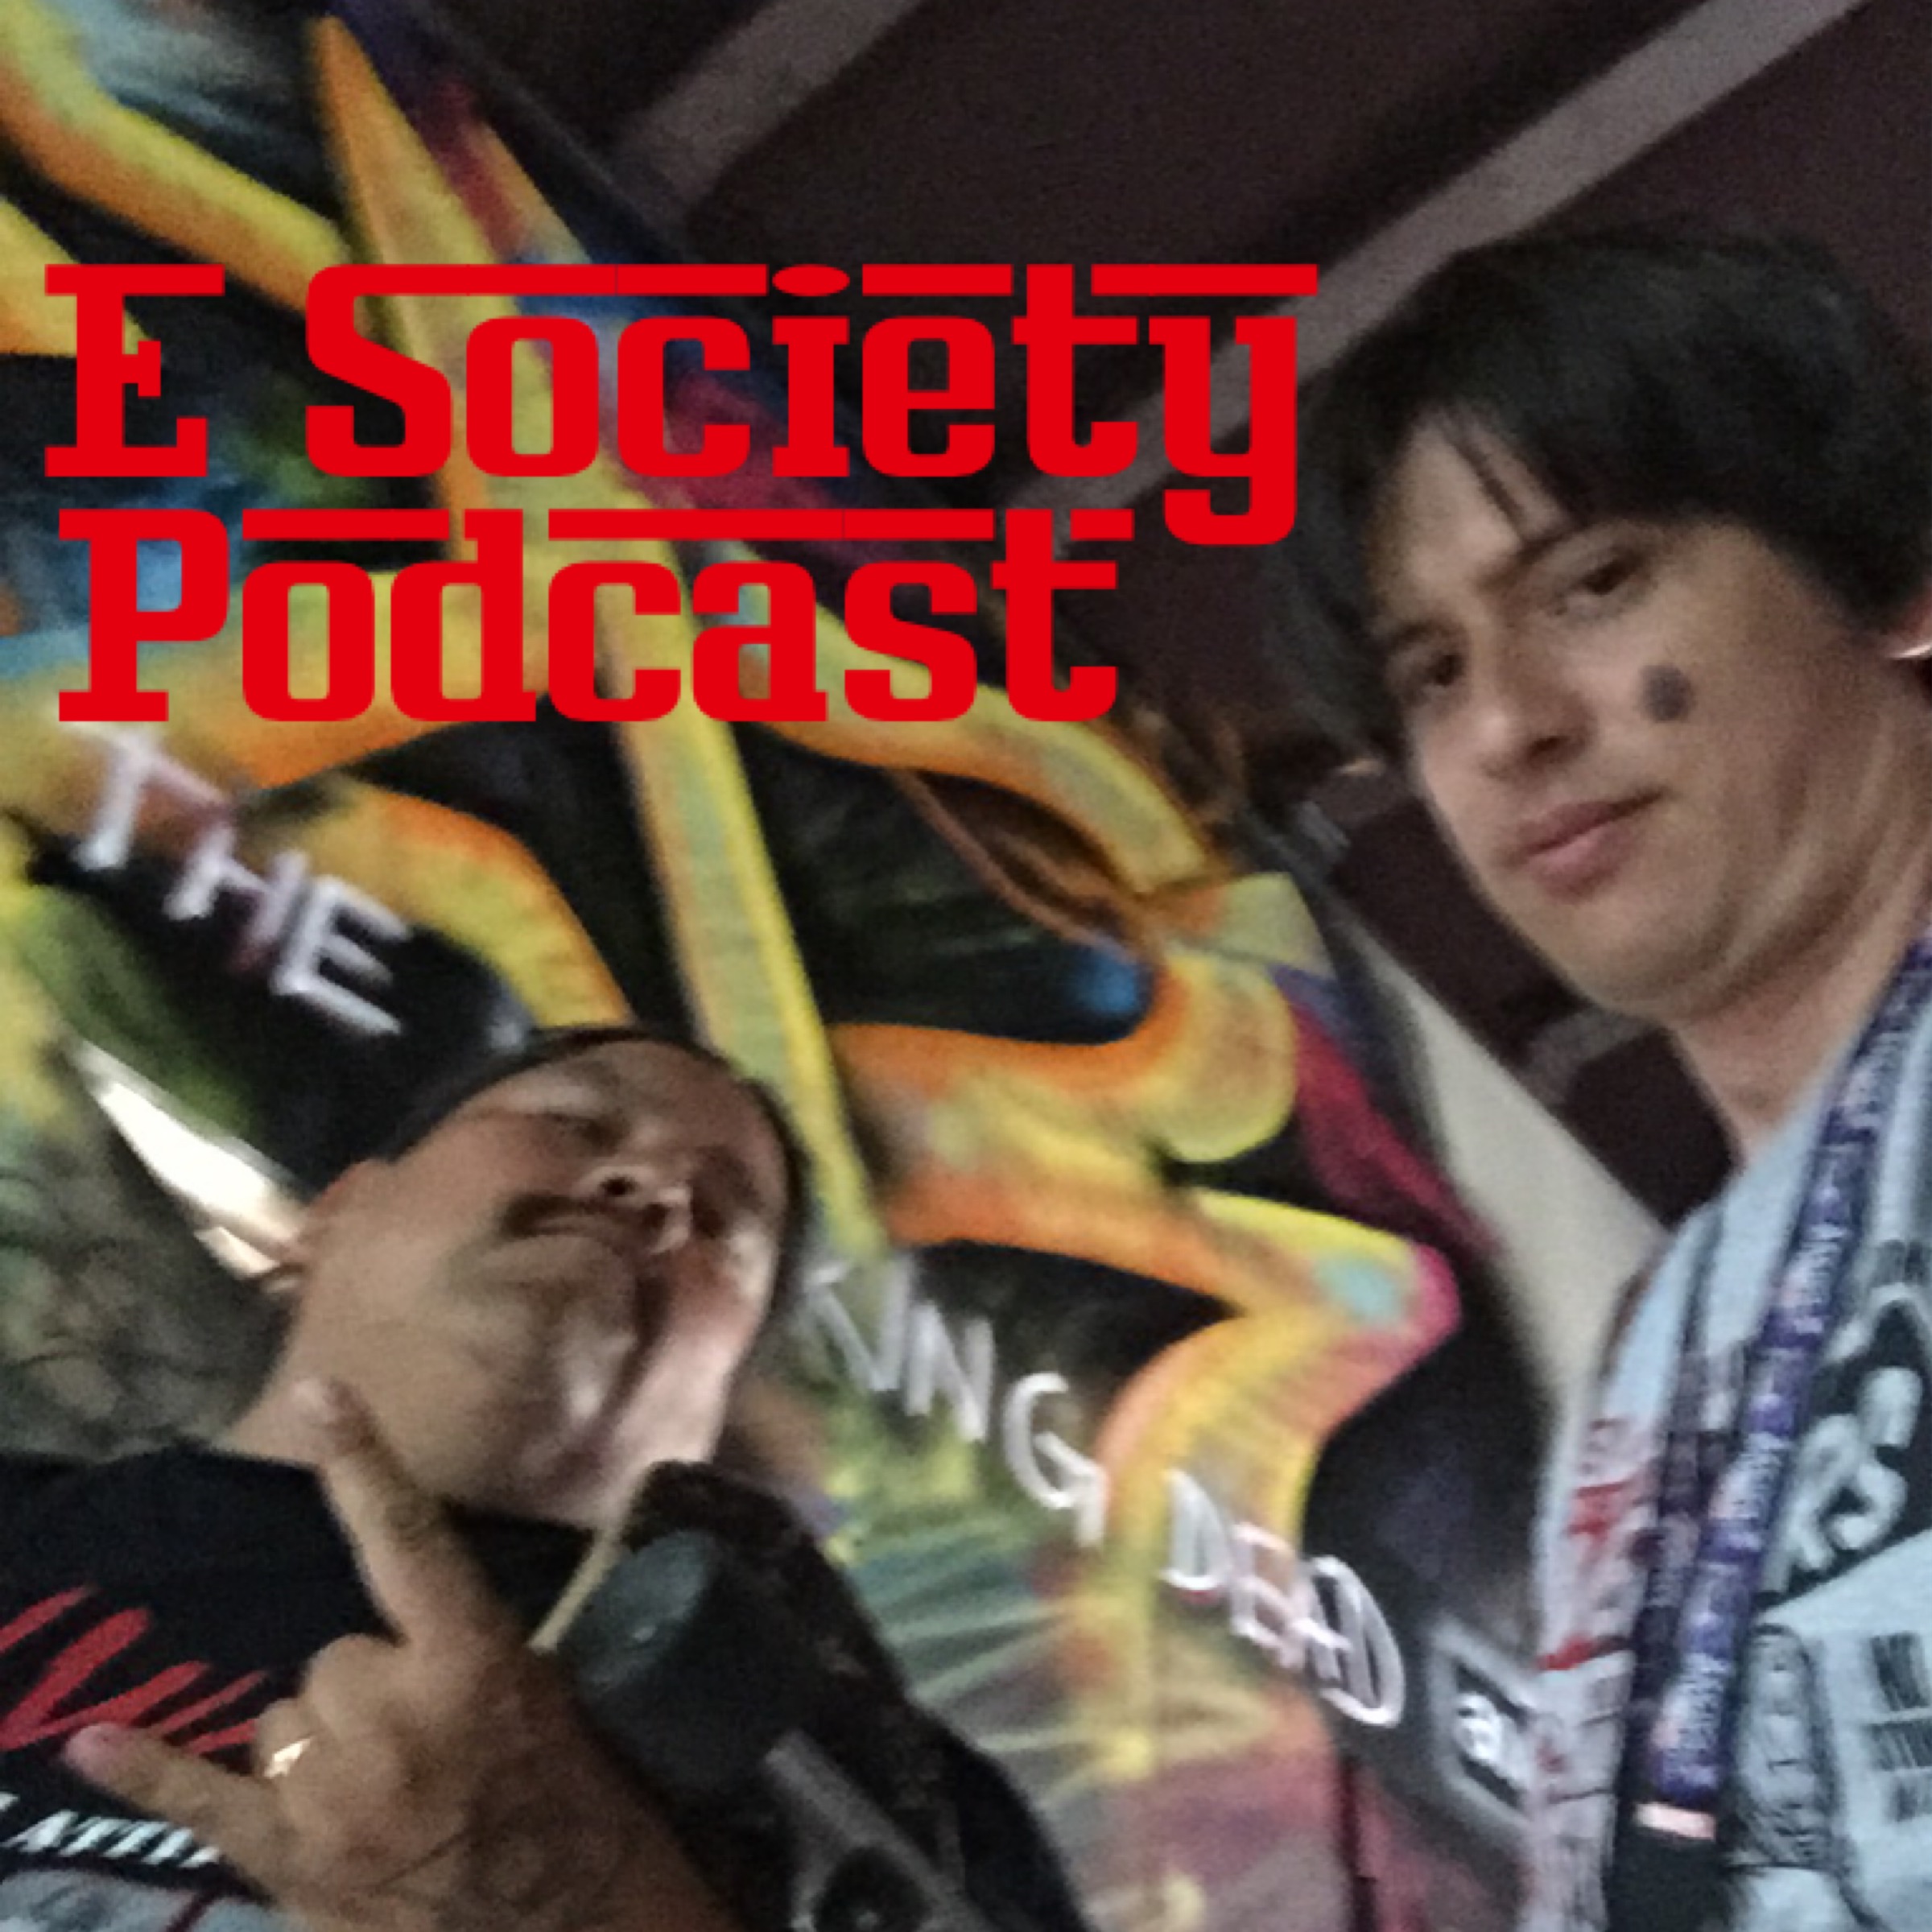 E Society Podcast - Ep. 53: Jade and Nez love boy bands.